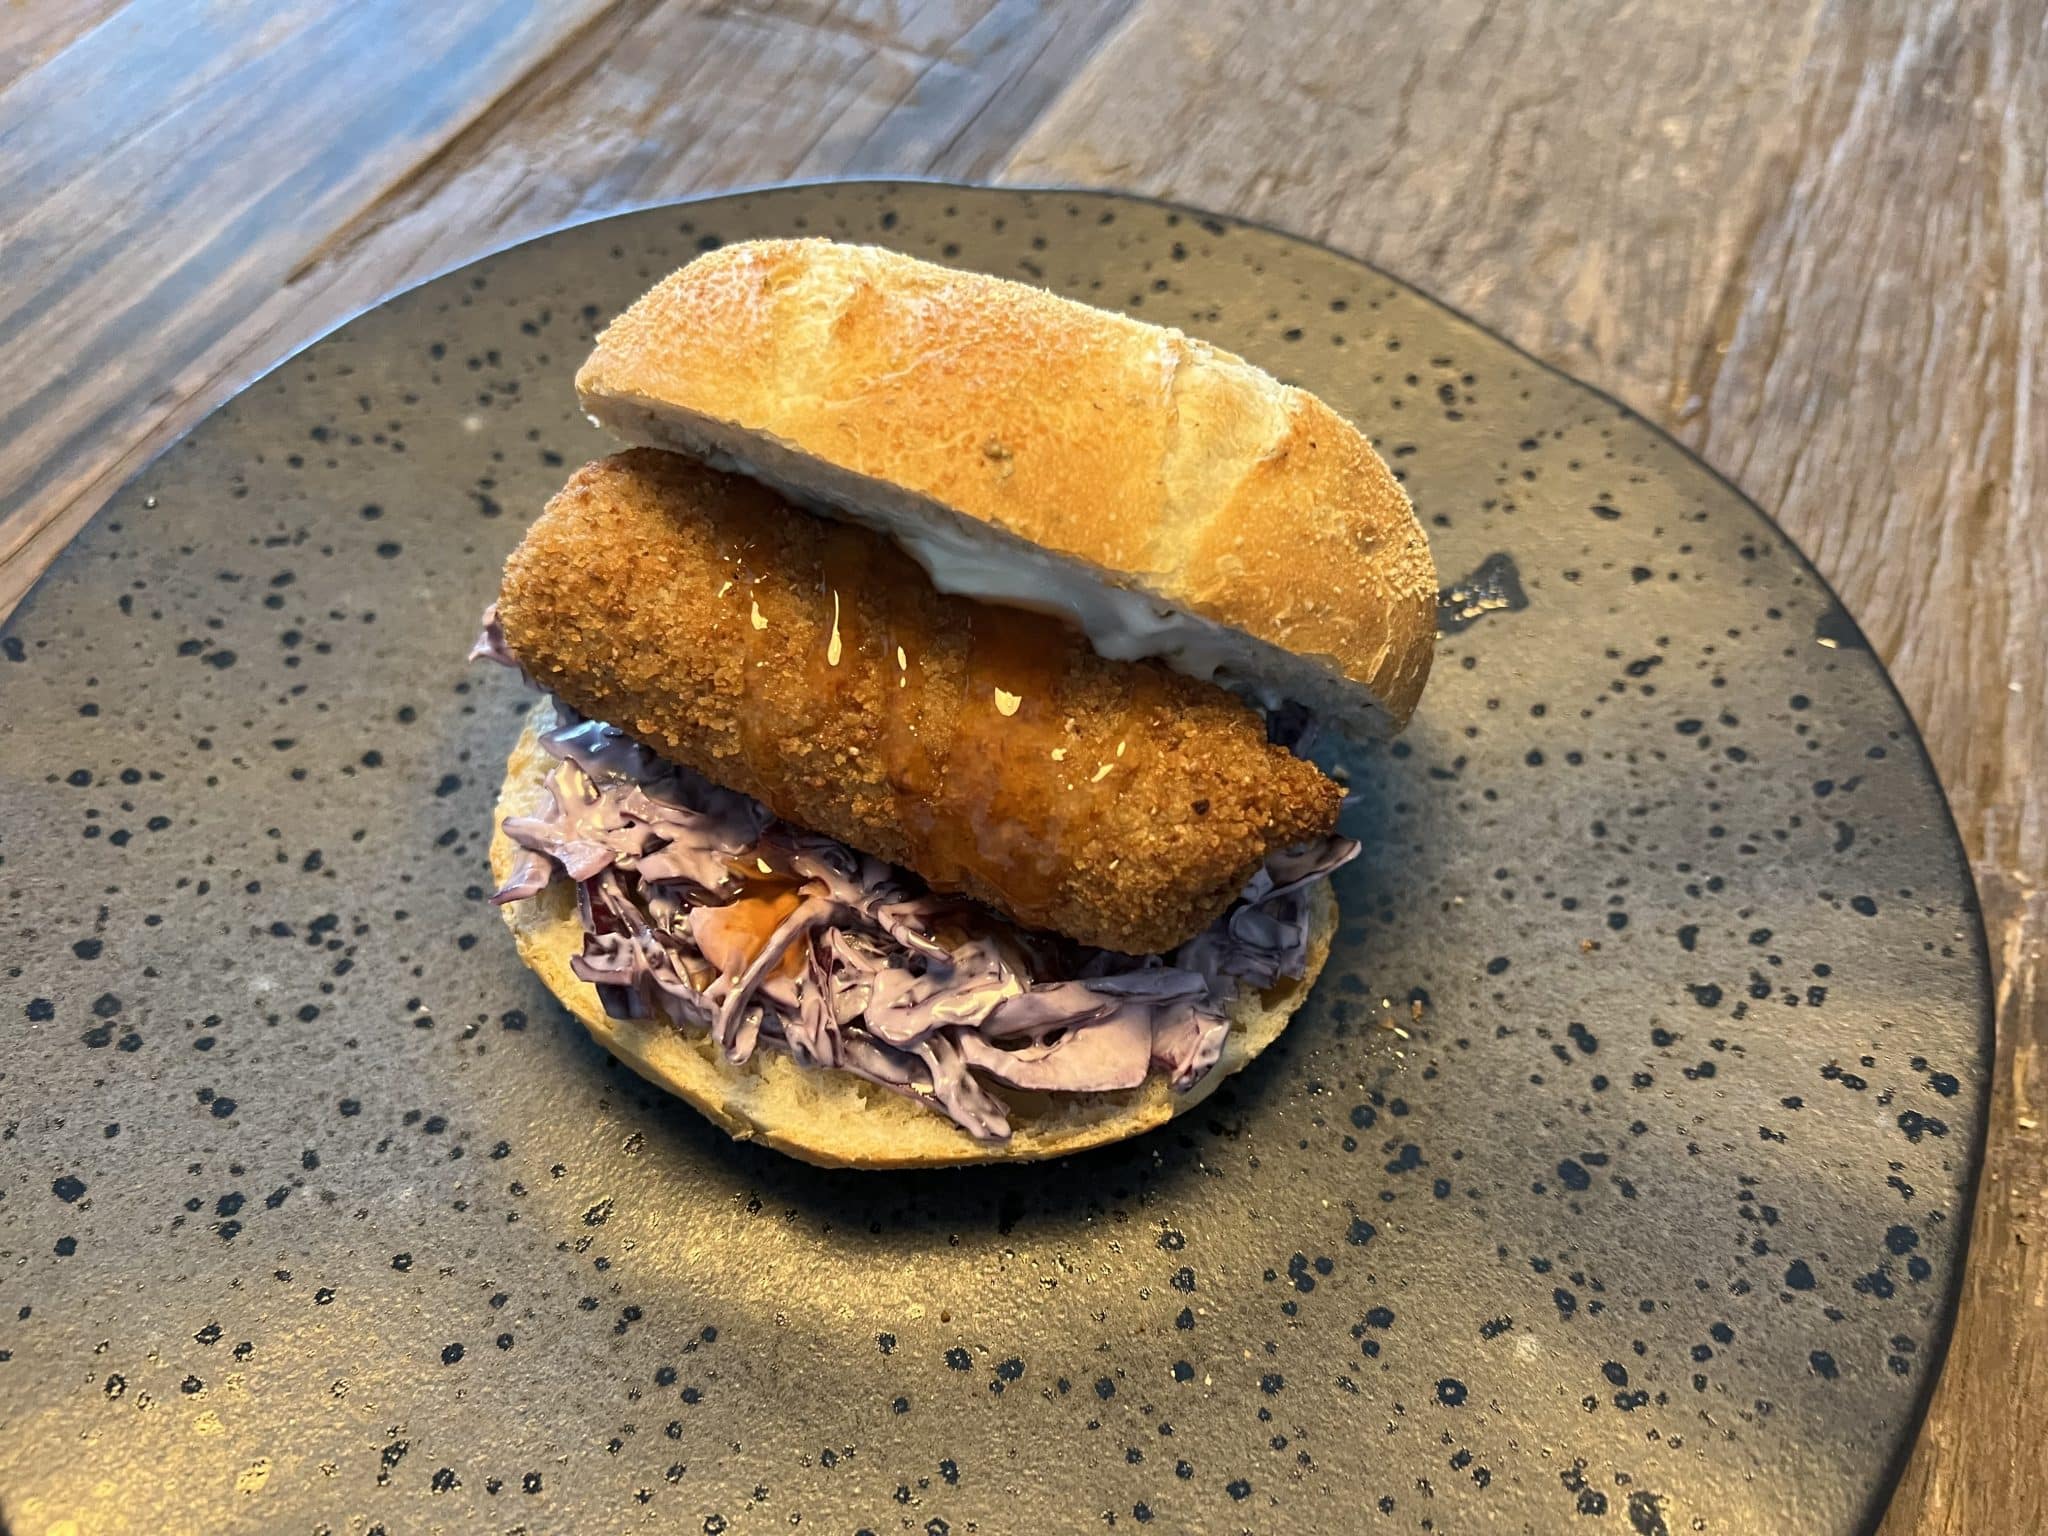 Sandwich with Croquette and Coleslaw